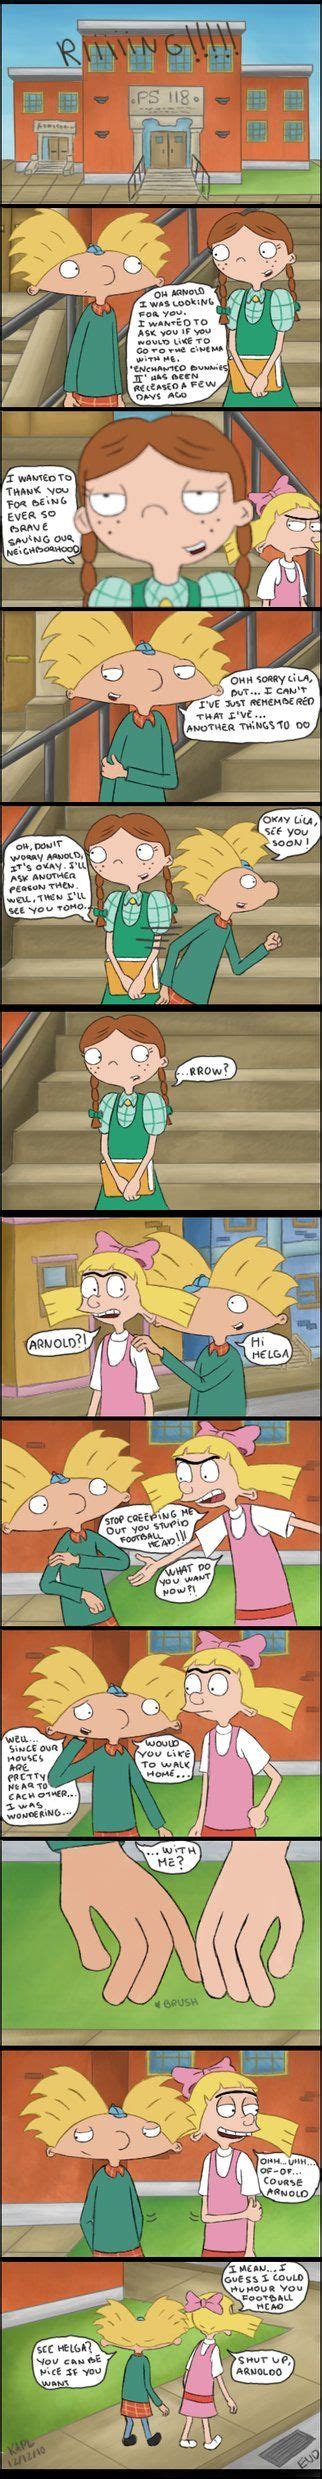 17 best images about hey arnold on pinterest cartoon high schools and all grown up